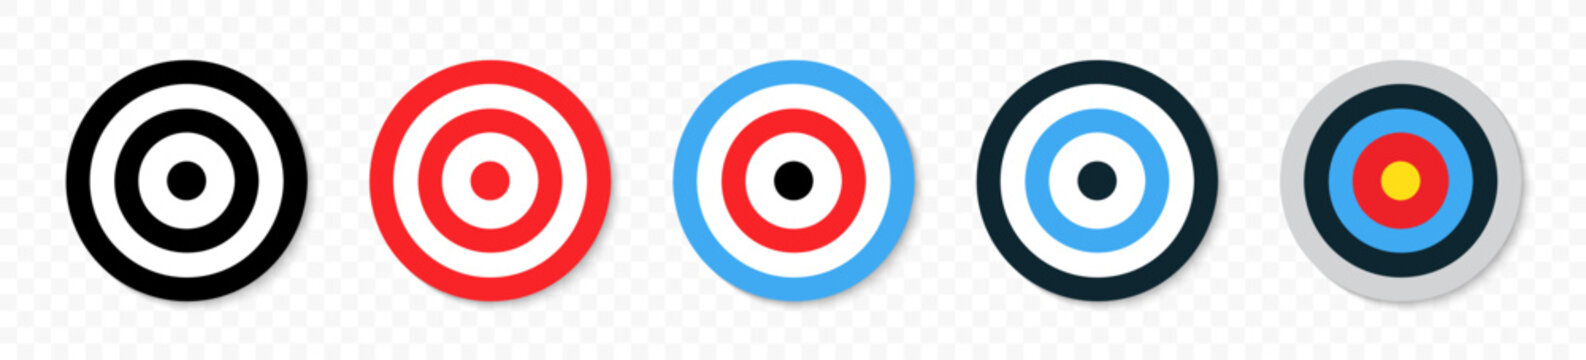 Archery targets isolated on transparent background. Archery target icon set. Realistic targets. Dartboard icons. EPS 10